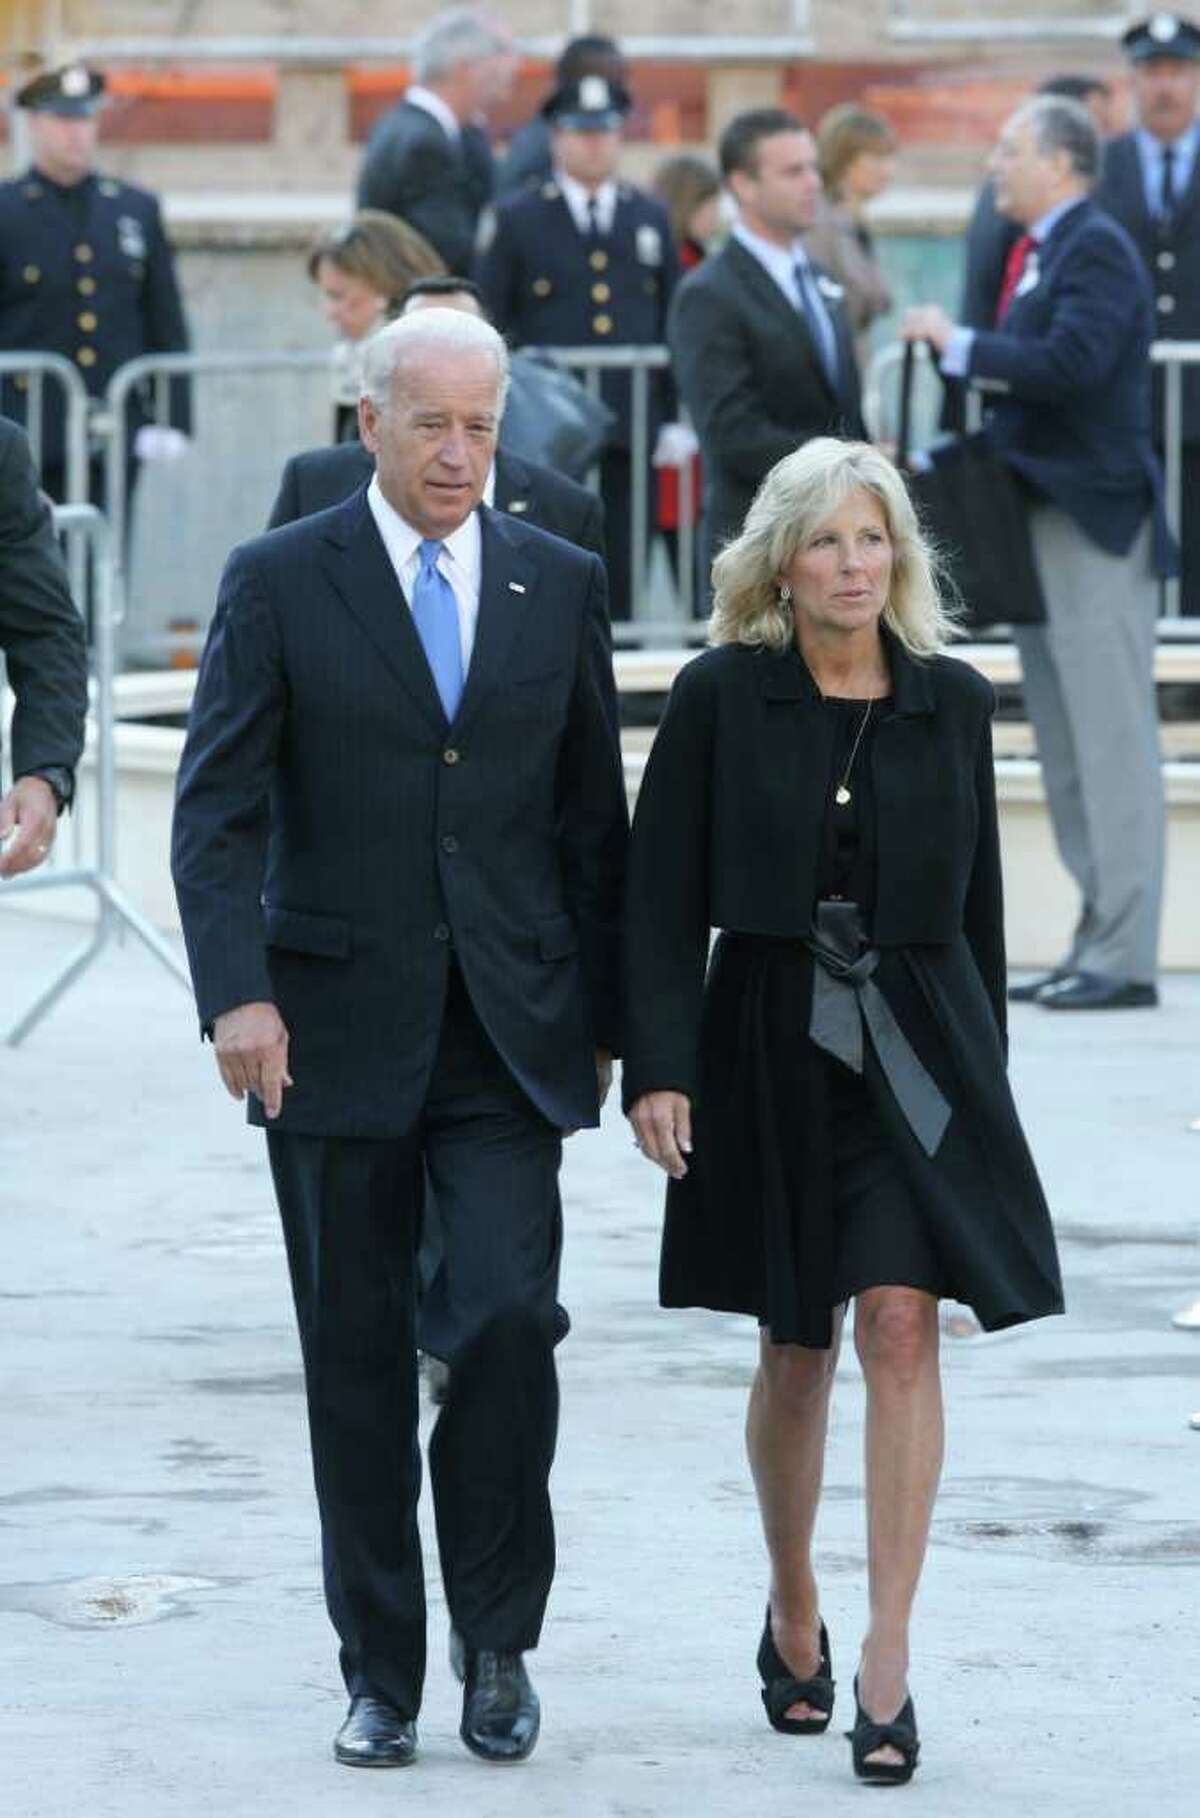 NEW YORK - SEPTEMBER 11: U.S. Vice President Joe Biden and his wife Jill Biden depart at Ground Zero after the annual memorial service September 11, 2010 in New York City. Thousands will gather to pay a solemn homage on the ninth anniversary of the terrorist attacks that killed nearly 3,000 people on September 11, 2001. (Photo by Brigitte Stelzer-Pool/Getty Images) *** Local Caption *** Jill Biden;Joe Biden